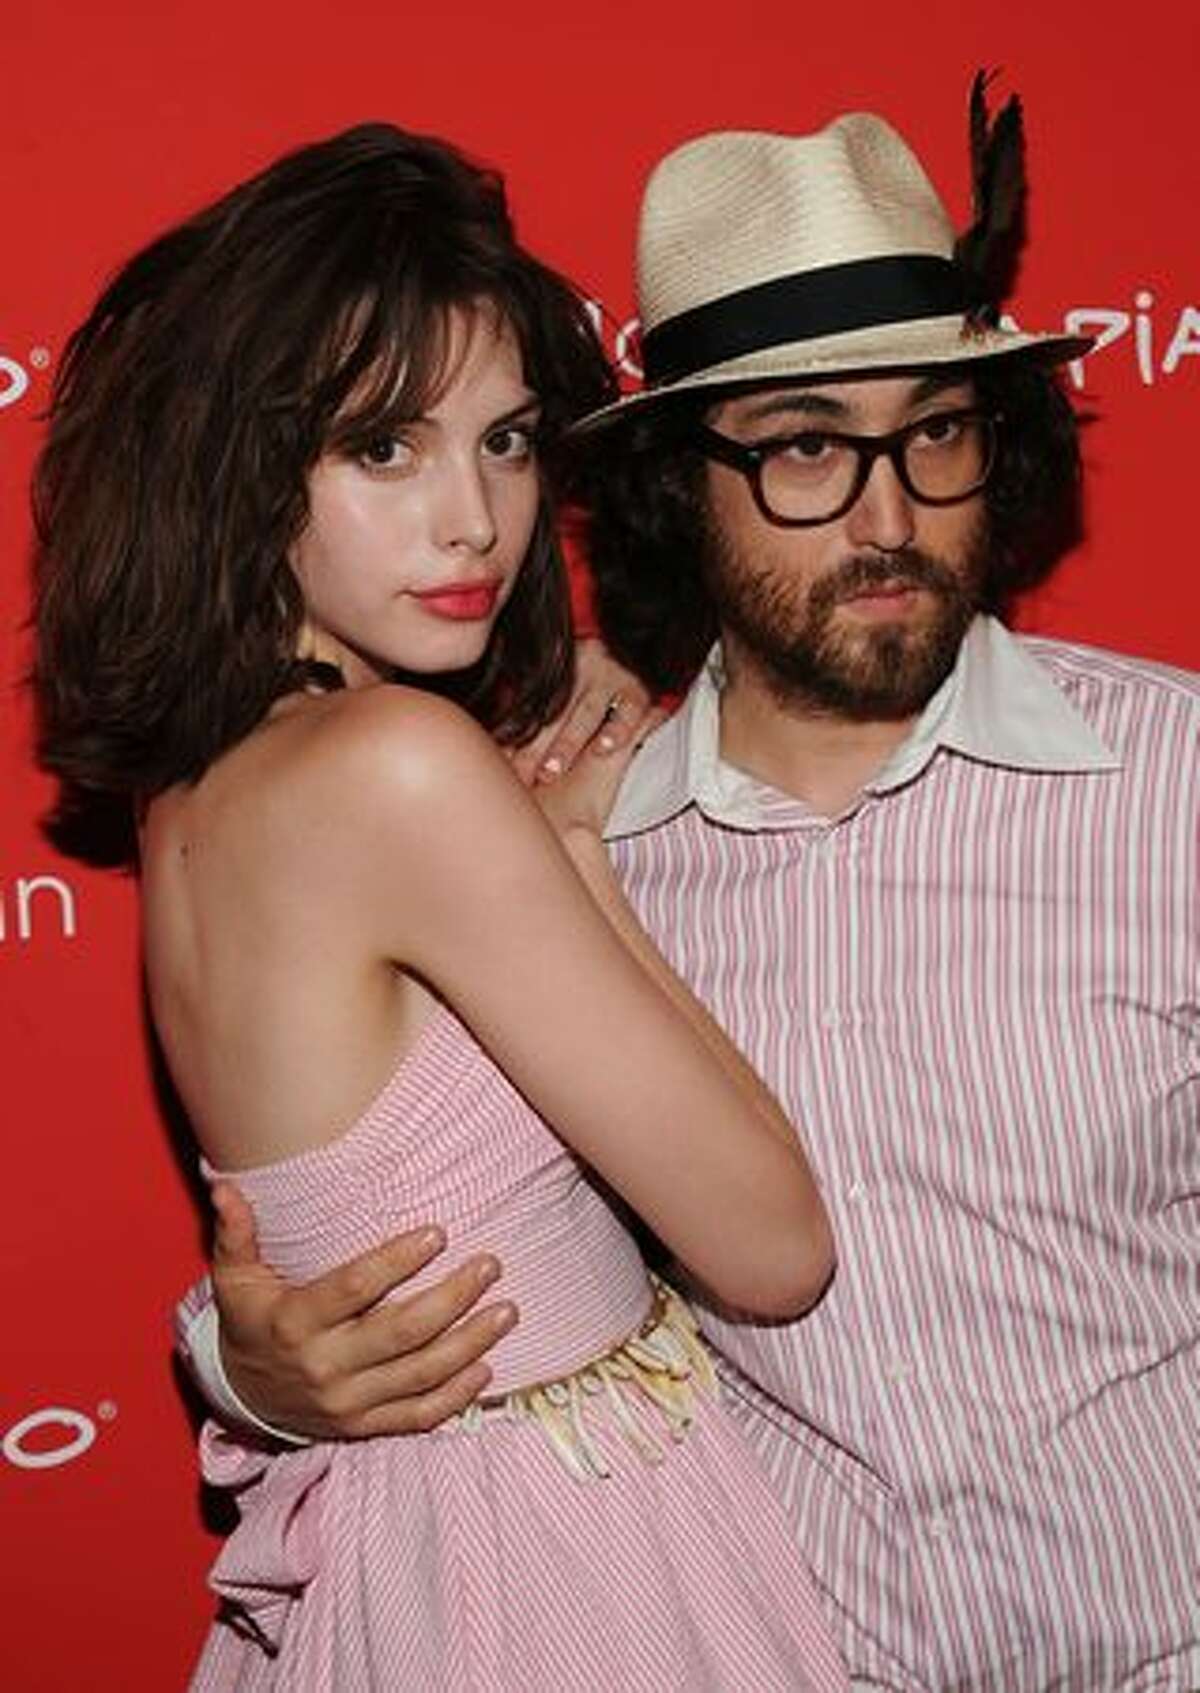 Musician Sean Lennon (R) and Charlotte Kemp Muhl attend the premiere of "The Extra Man" at Village East Cinema in New York City.